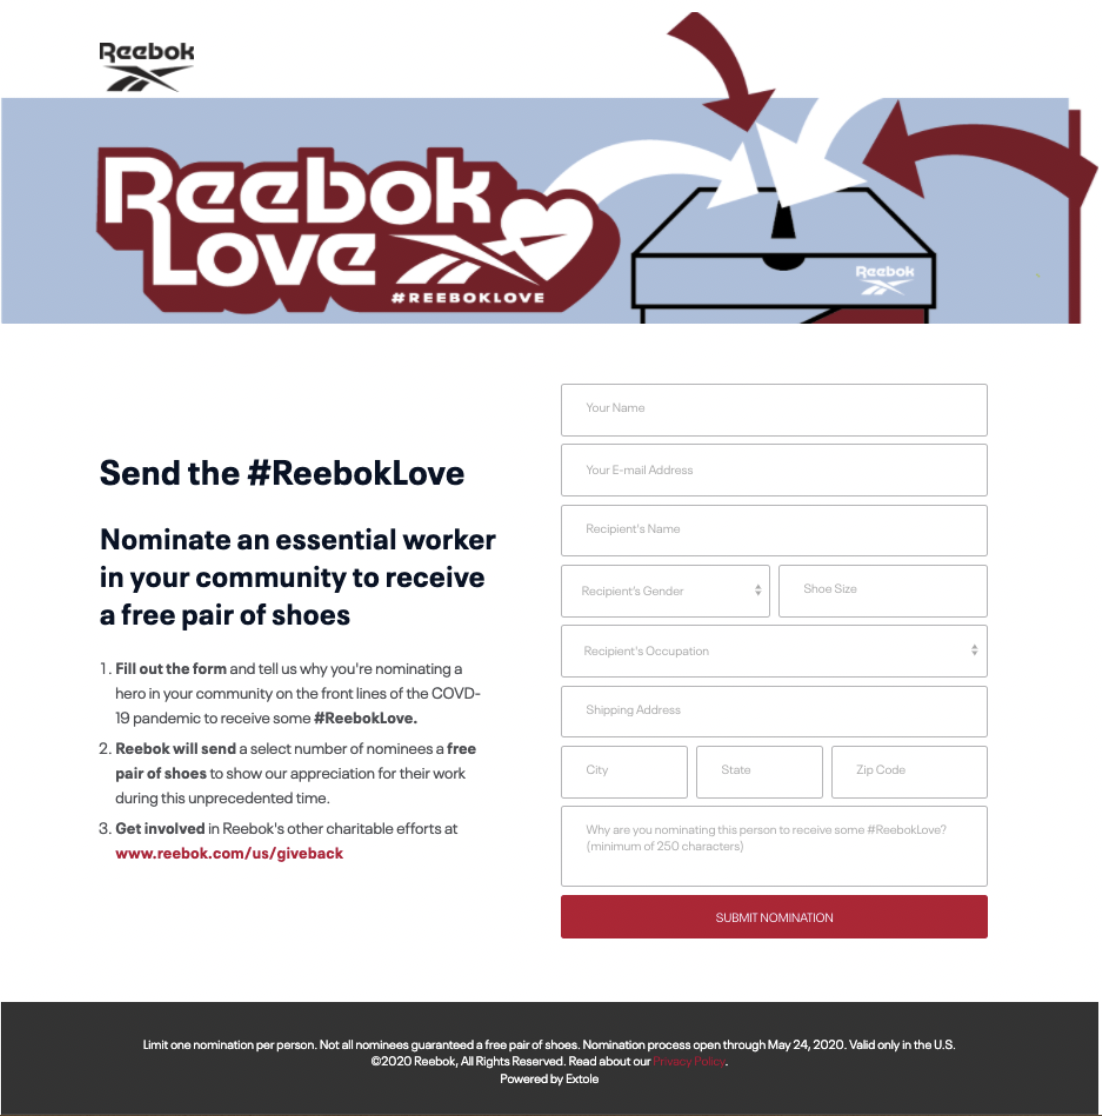 The signup experience for Reebok's Nomination program